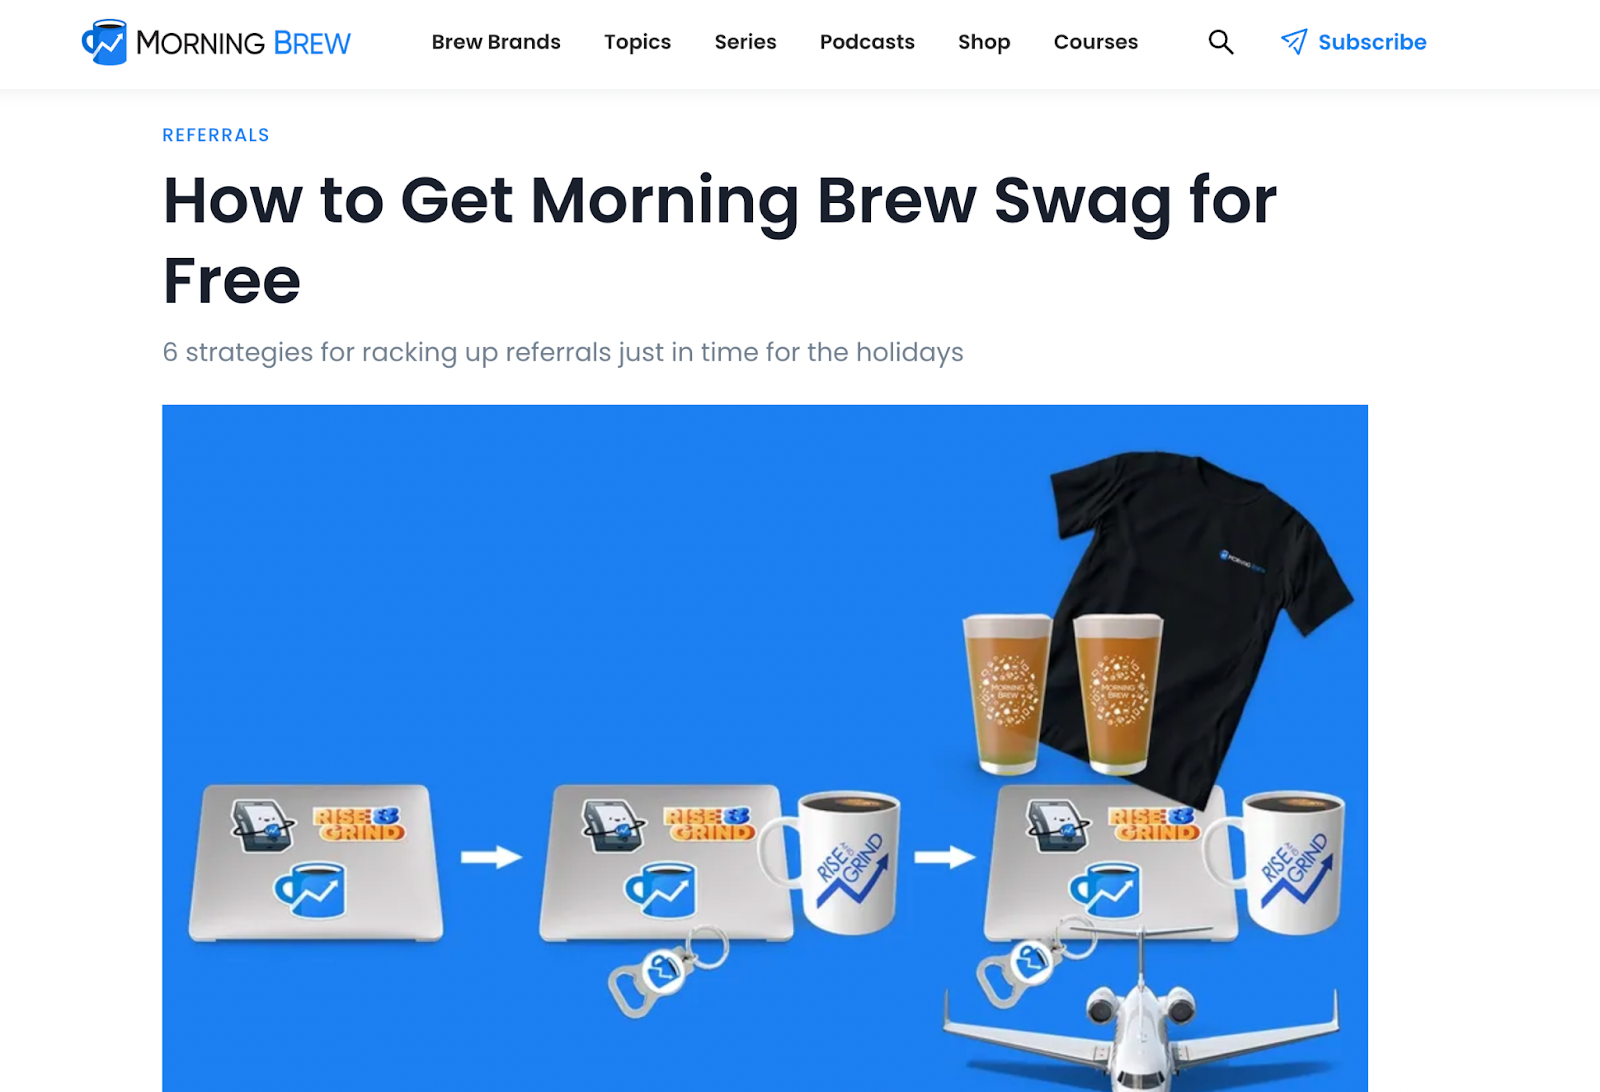 Referral marketing example 2 by Morning Brew